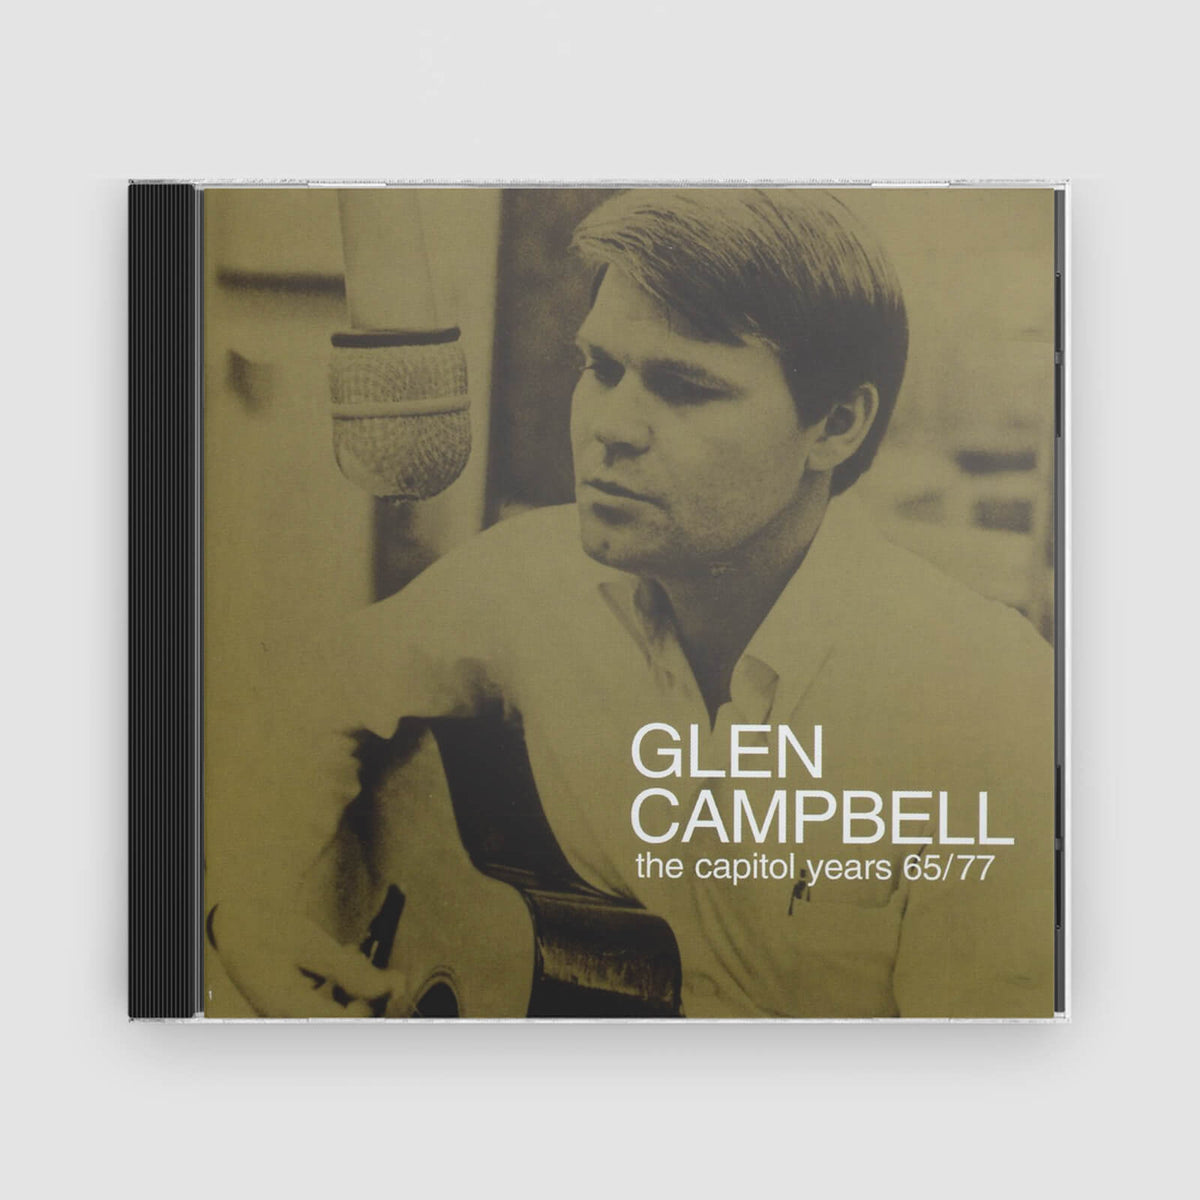 Glen Campbell : Glen Campbell - The Capitol Years 1965 - 1977